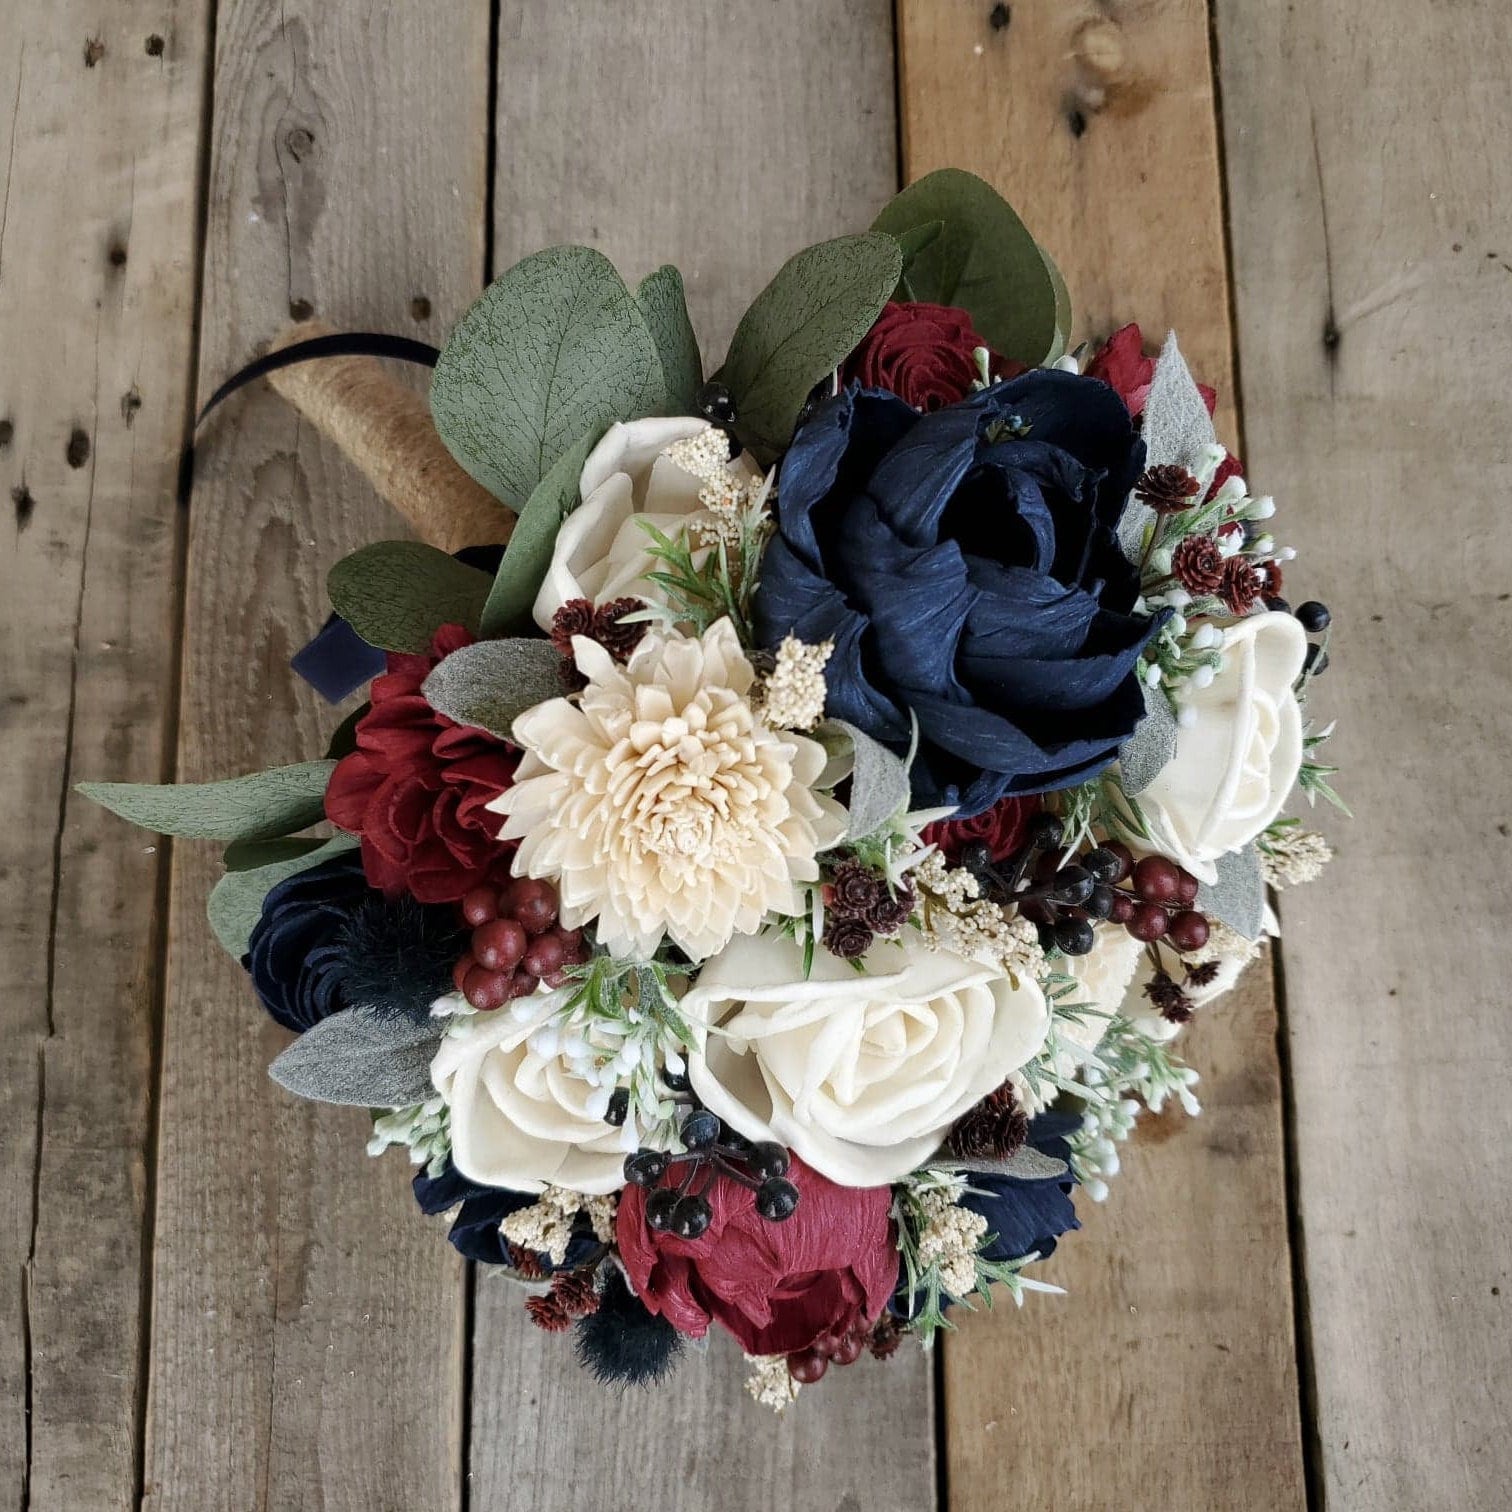 Wood Flower Bouquet, Navy and Burgundy Bridal Bouquet, Burgundy Wedding Bouquet, Wooden Flower Bouquet, Sola Wood Flowers